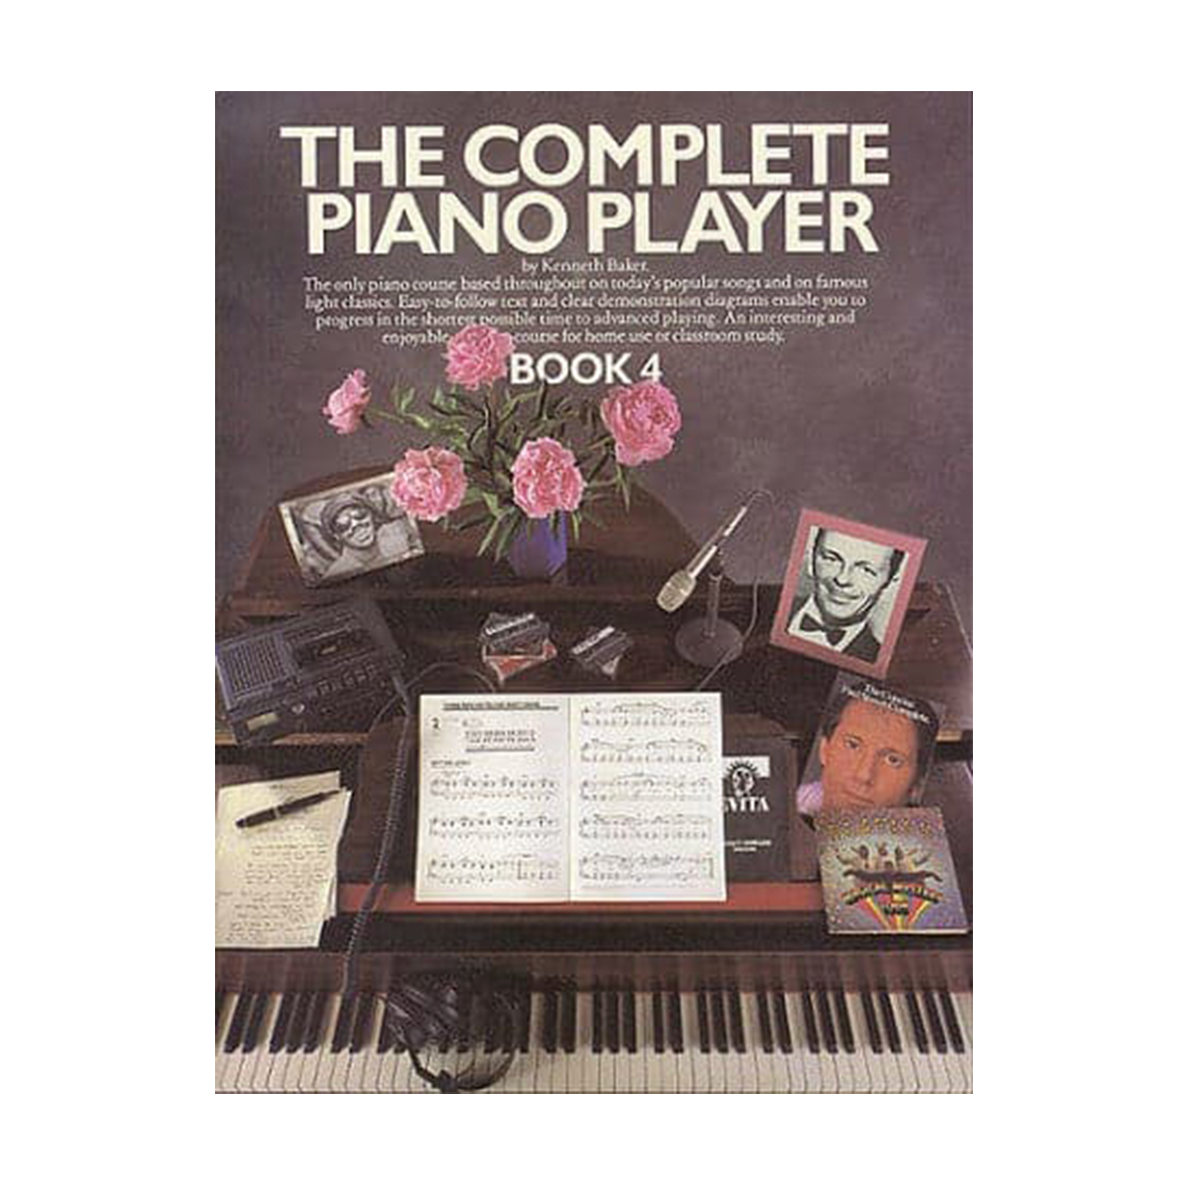 The Complete Piano Player: Book 4